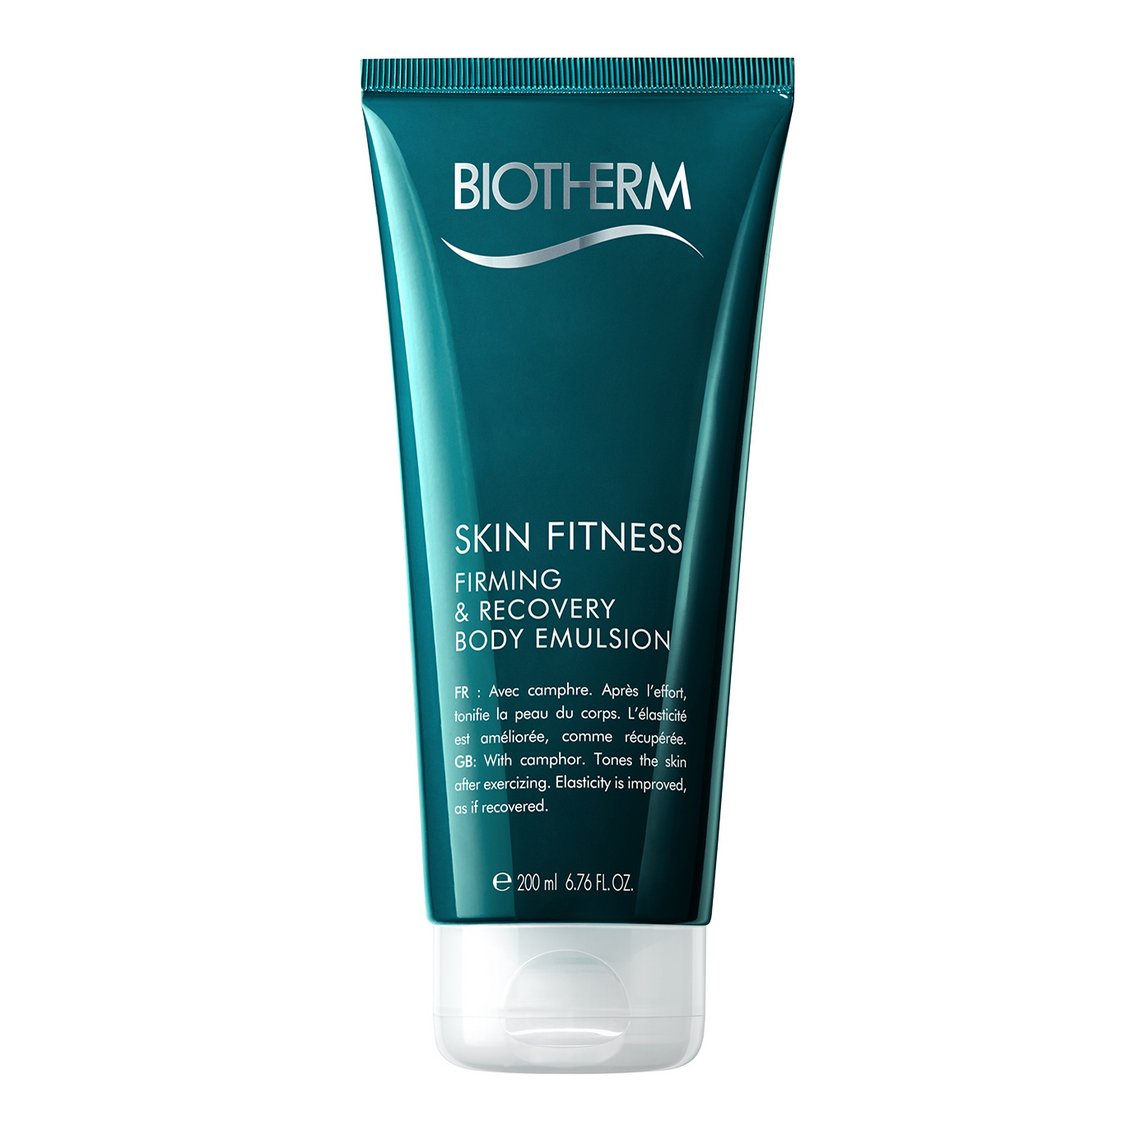 Skin Fitness Firming &amp; Recovery Body Emulsion: Biotherm